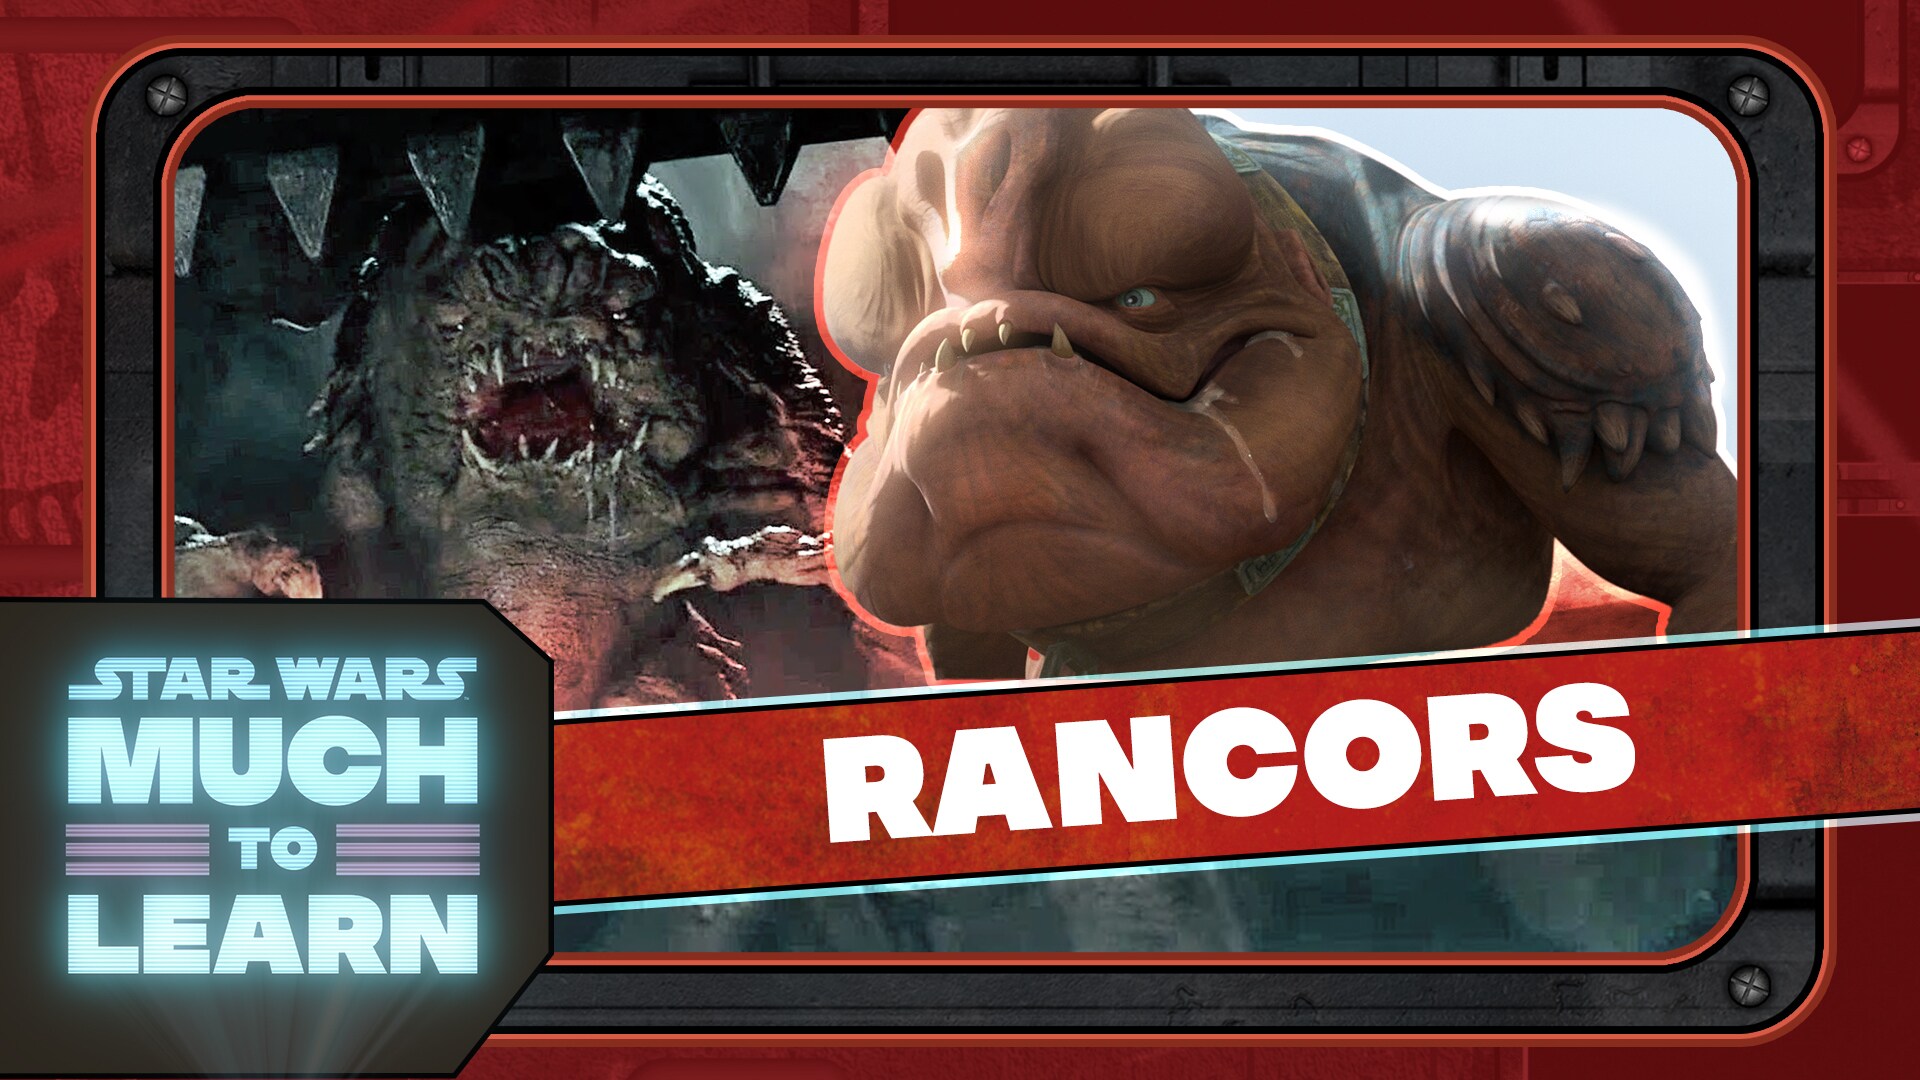 Rancors | Star Wars: Much to Learn